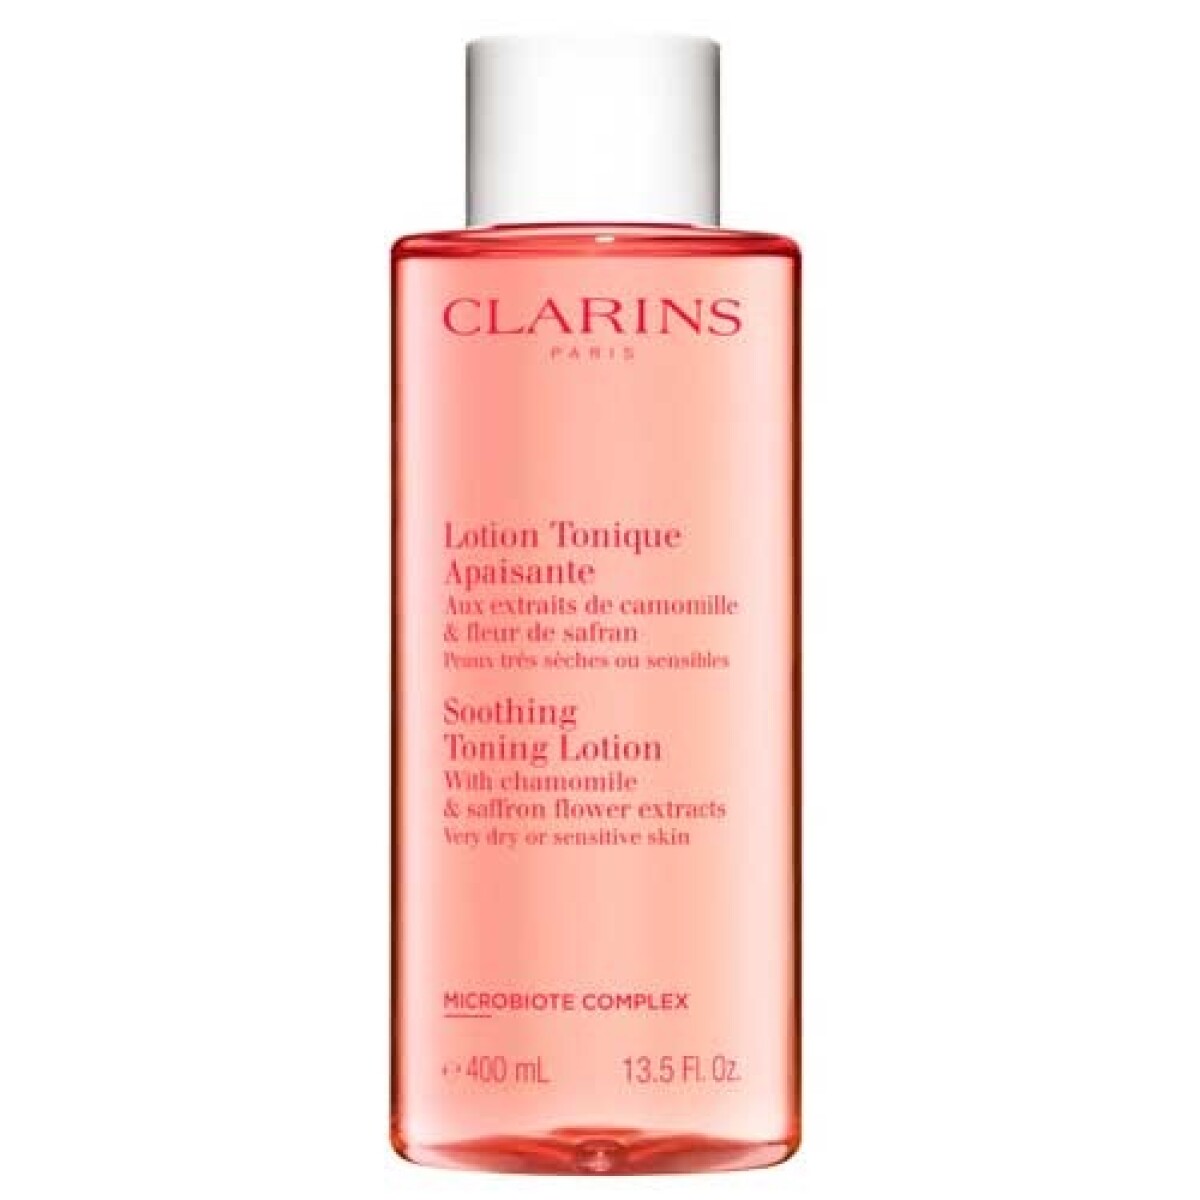 Clarins Sooting Toning Lotion 400ml 